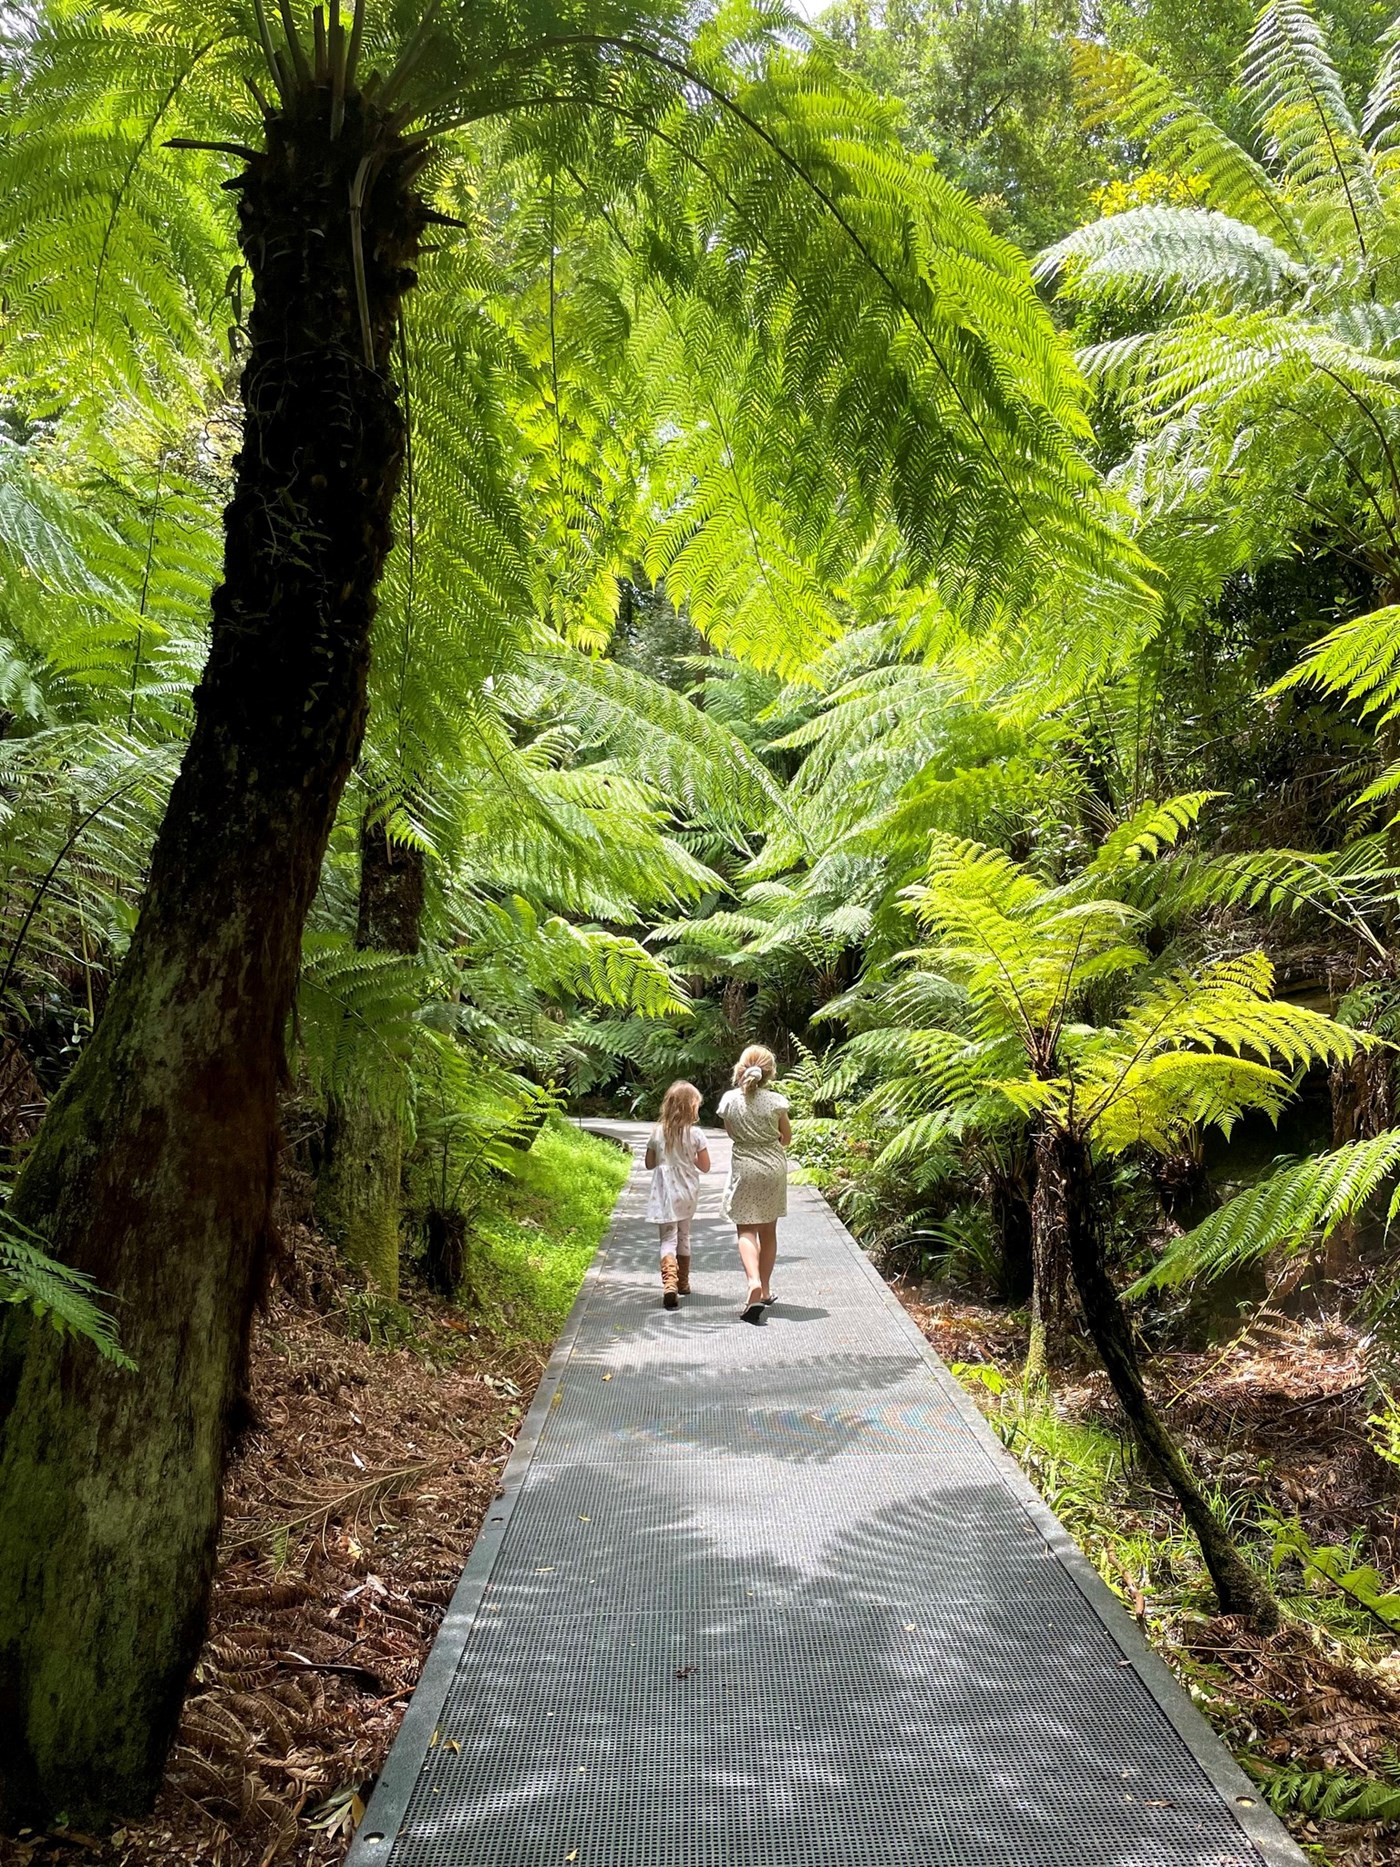 Two young girls walk along a footpath surrounded by green fronds at the Australian National Botanic Gardens Canberra